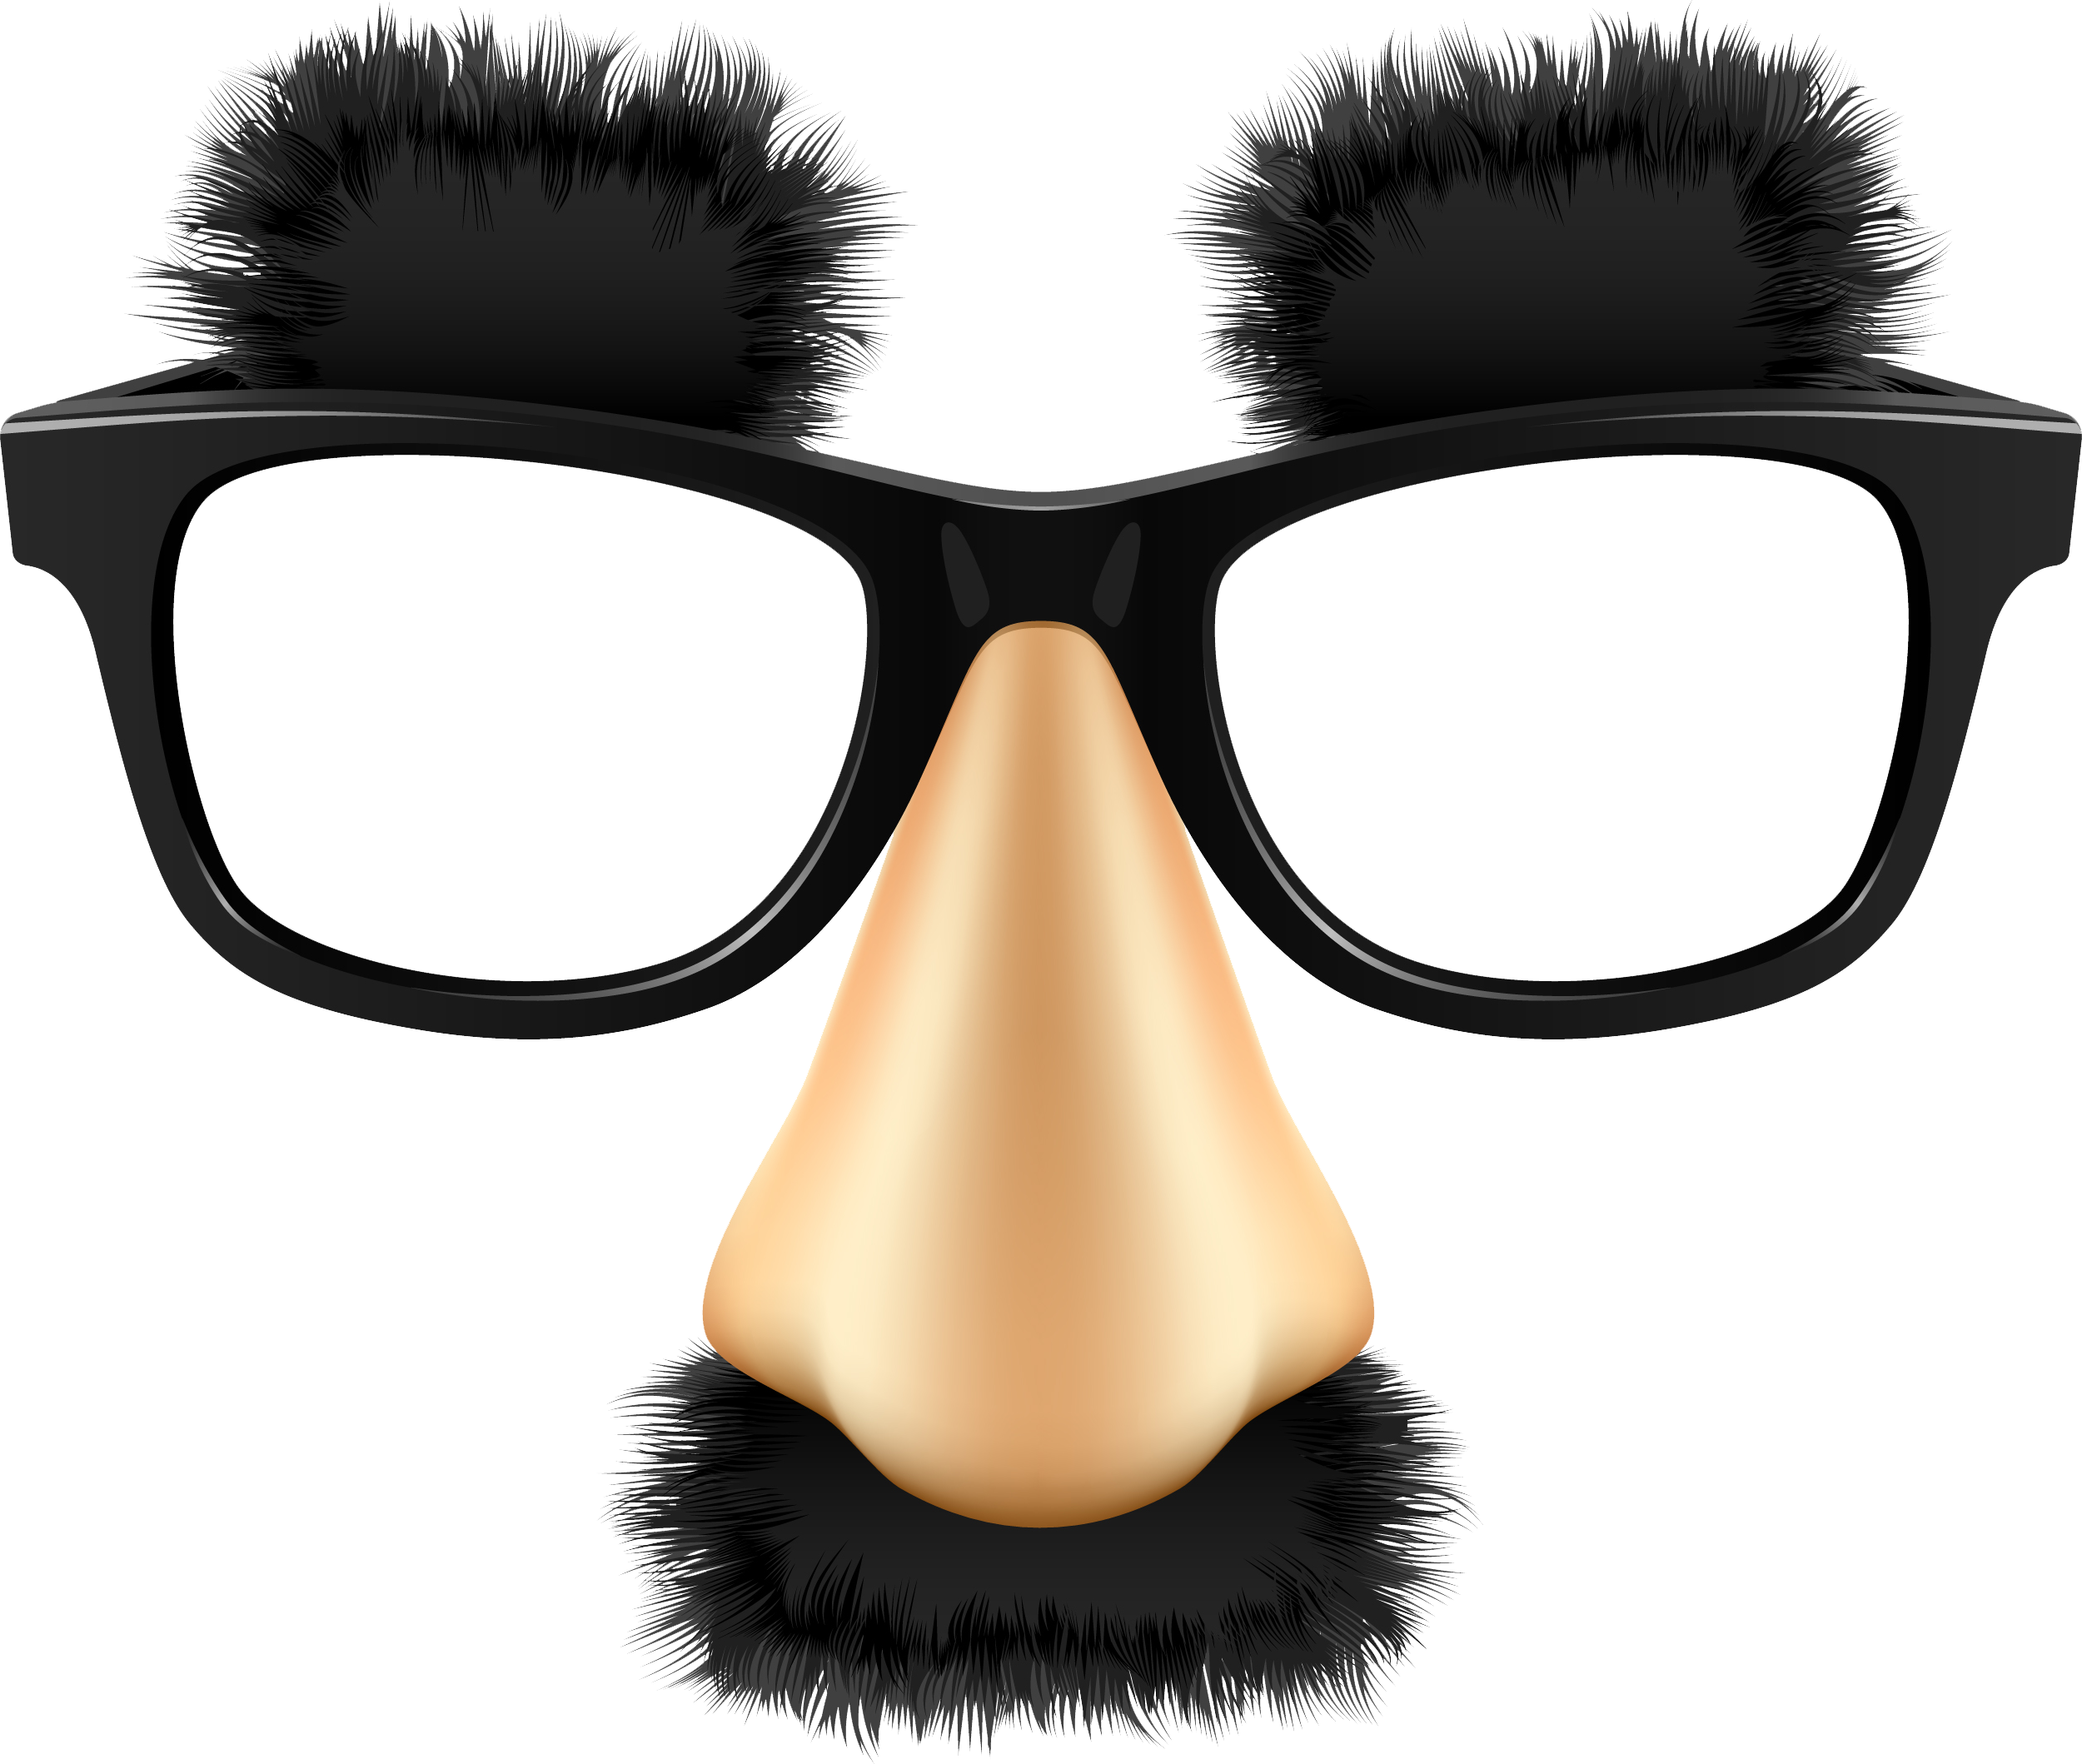 Disguise Groucho Stock Photography Glasses Free PNG HQ Clipart